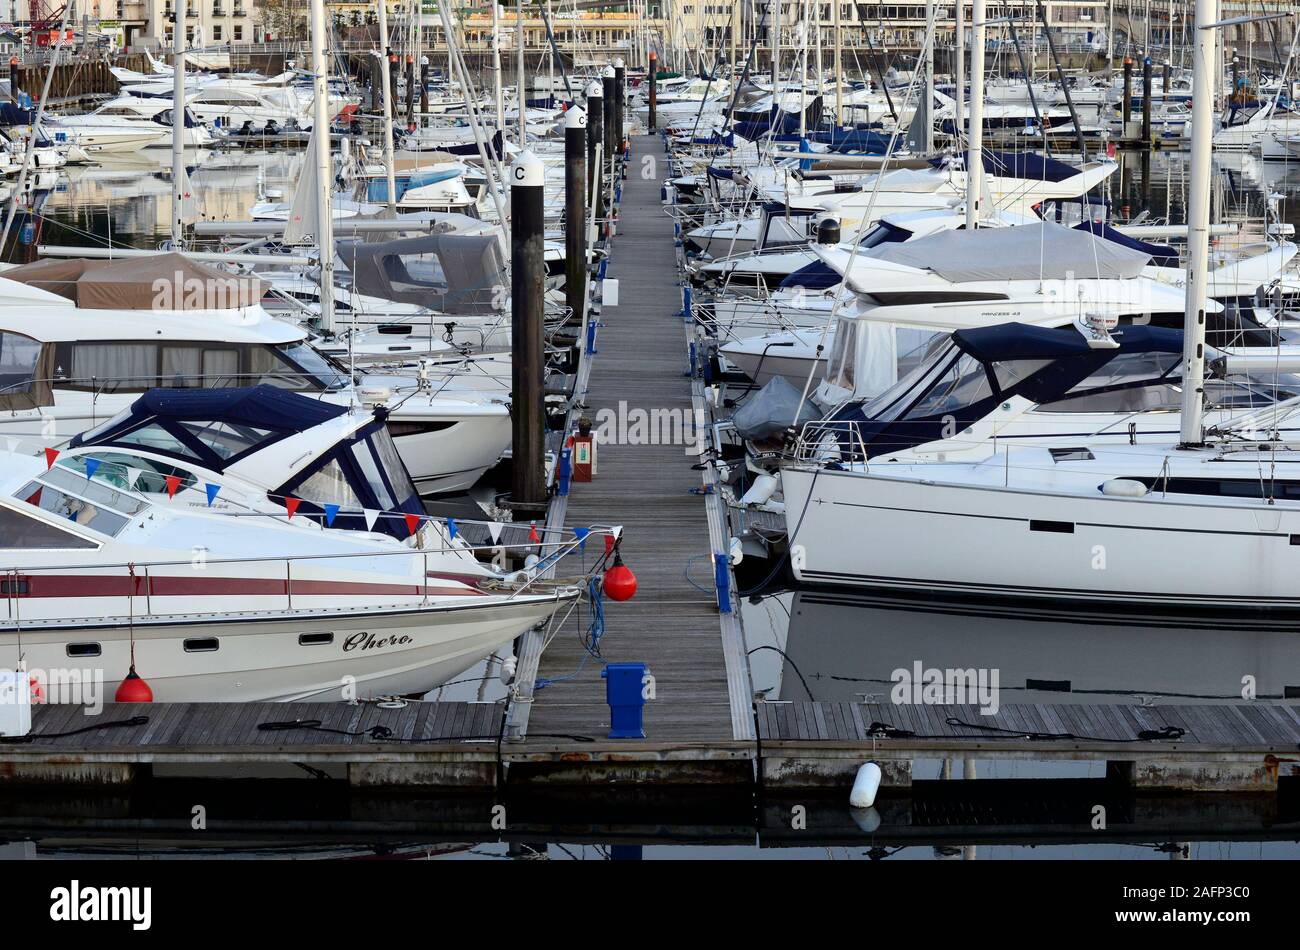 Many yachts and other boats seen moored in the harbour at Torquay, Devon, UK. Stock Photo